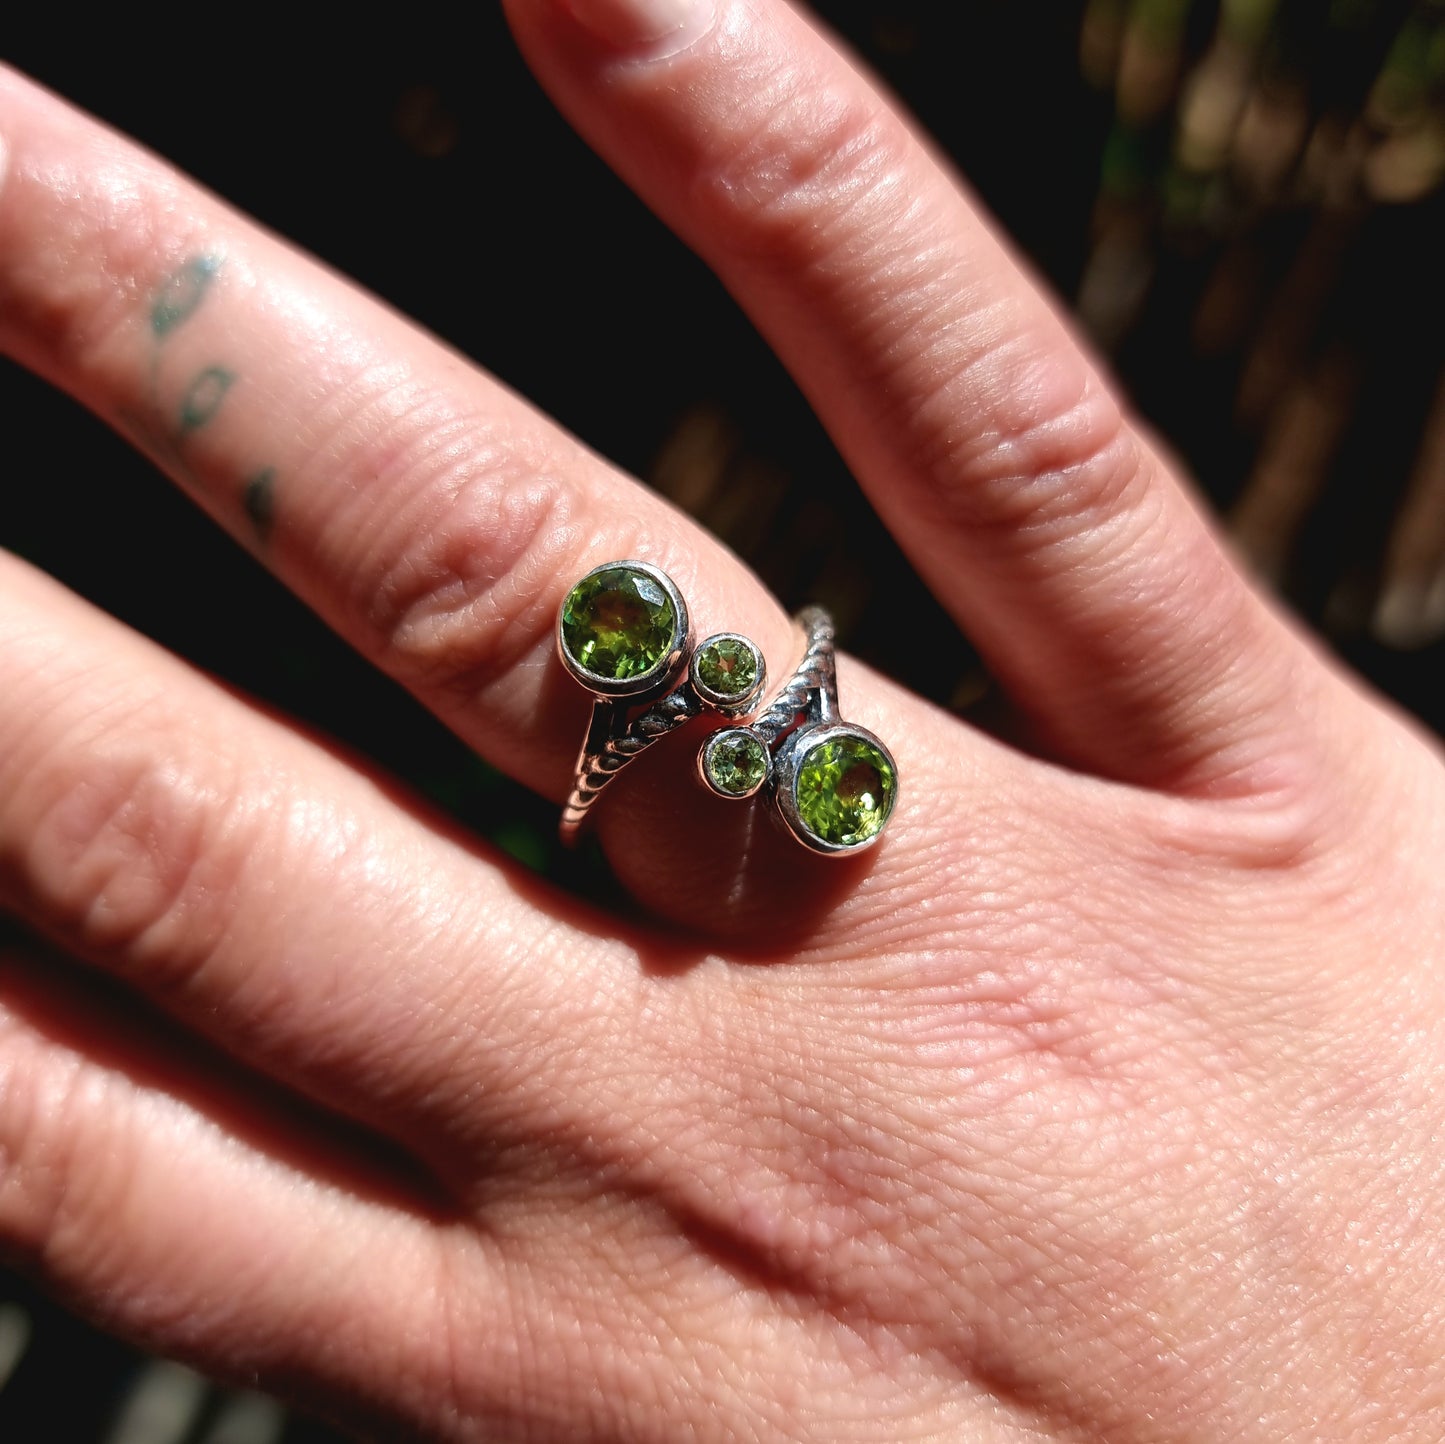 PERIDOT RING IN 925 SILVER SIZE 6 - BALANCE & PROTECTION